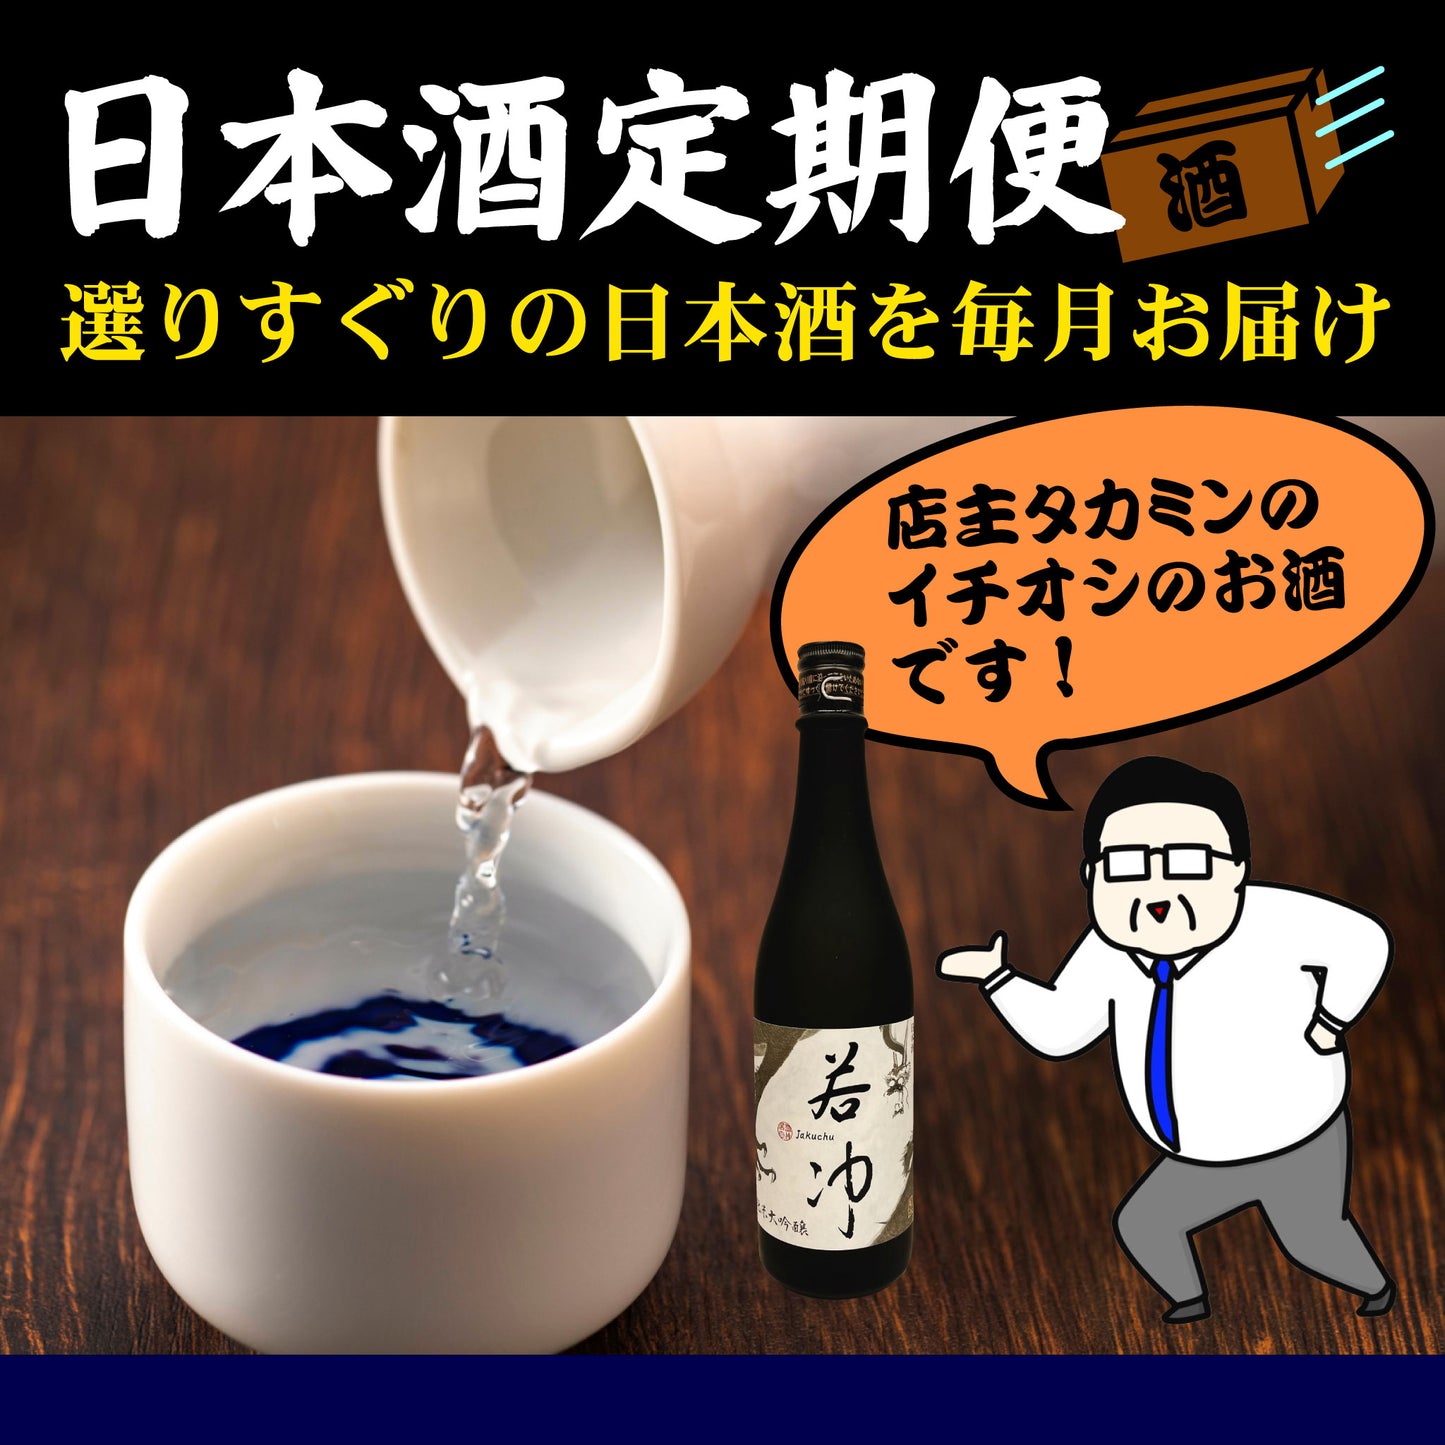 <Regular flights for home> We will deliver Takamin's recommended sake to your home every month! [Premium course for 6 months]